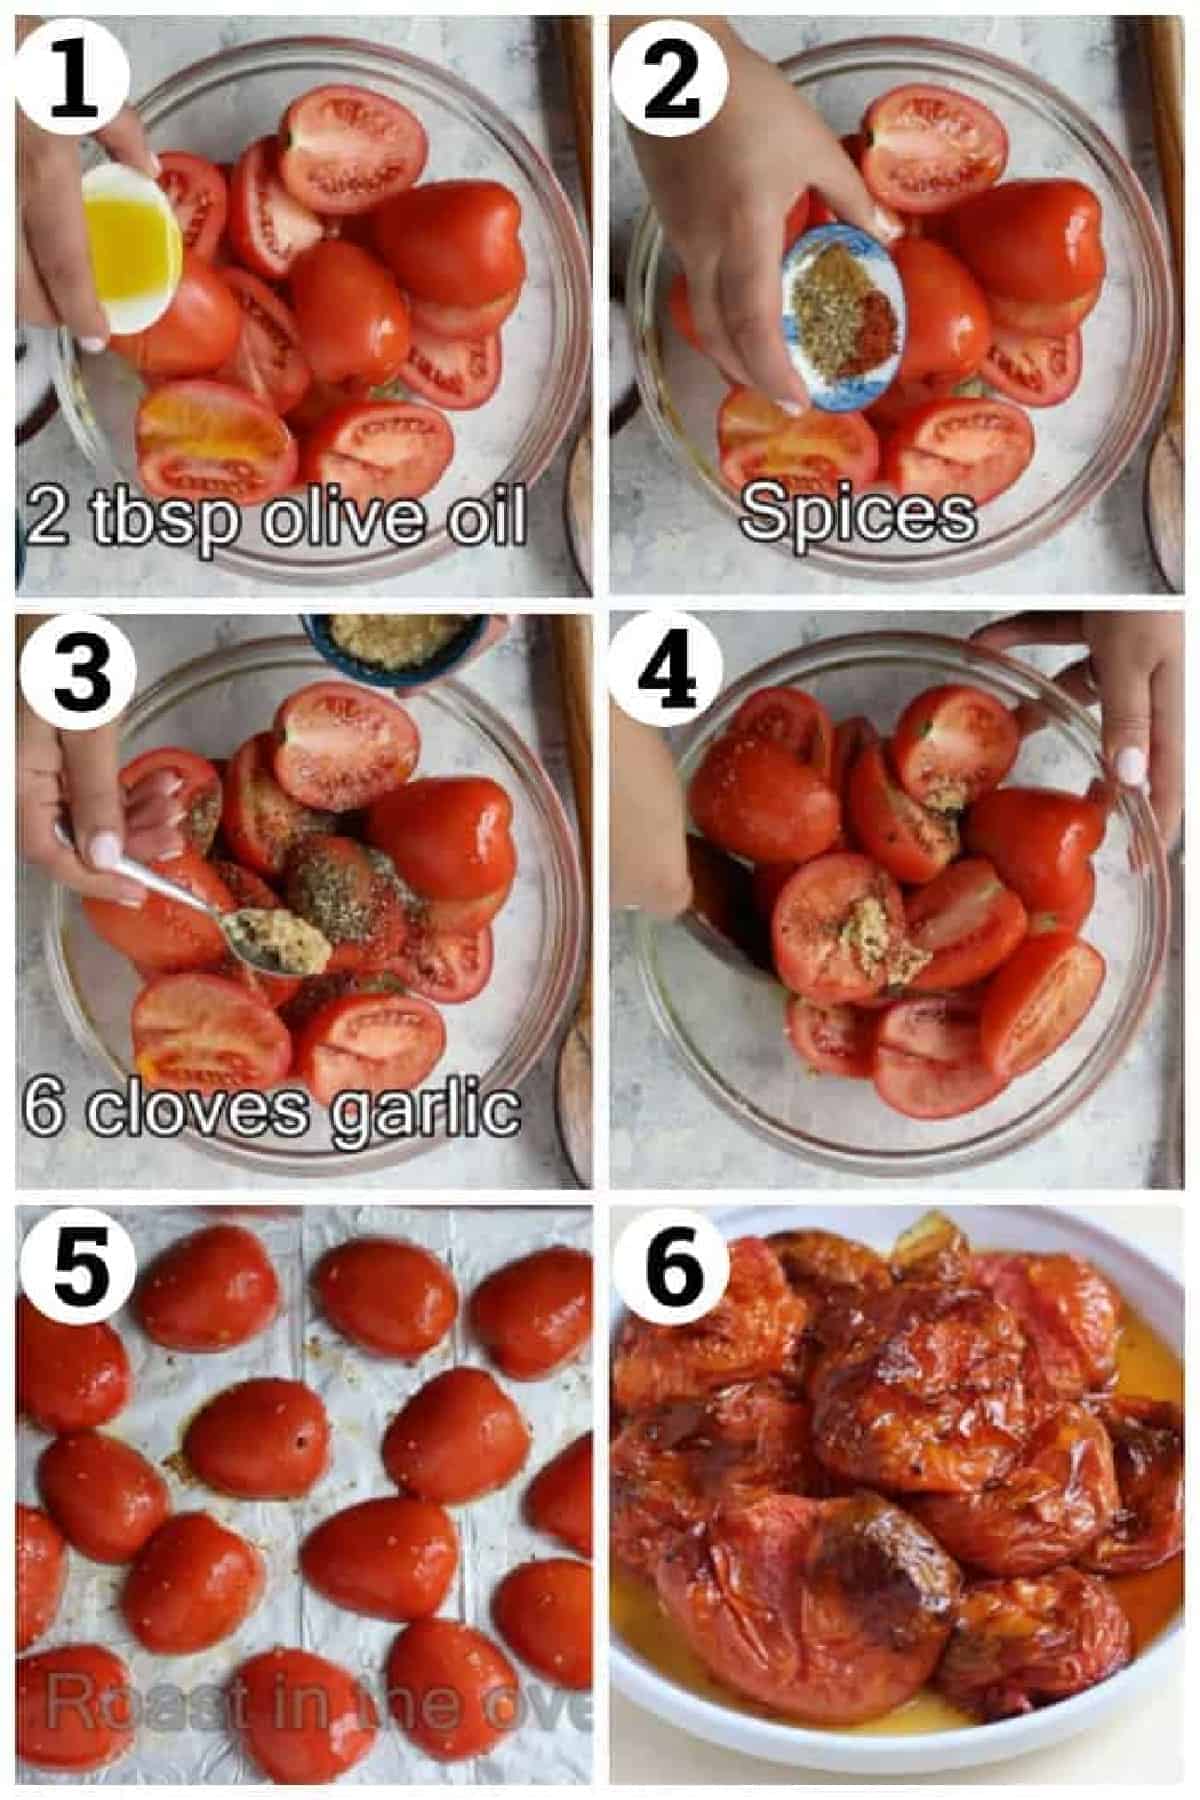 mix tomatoes with olive oil, spices, garlic and salt. Roast in the oven until soft and charred. 